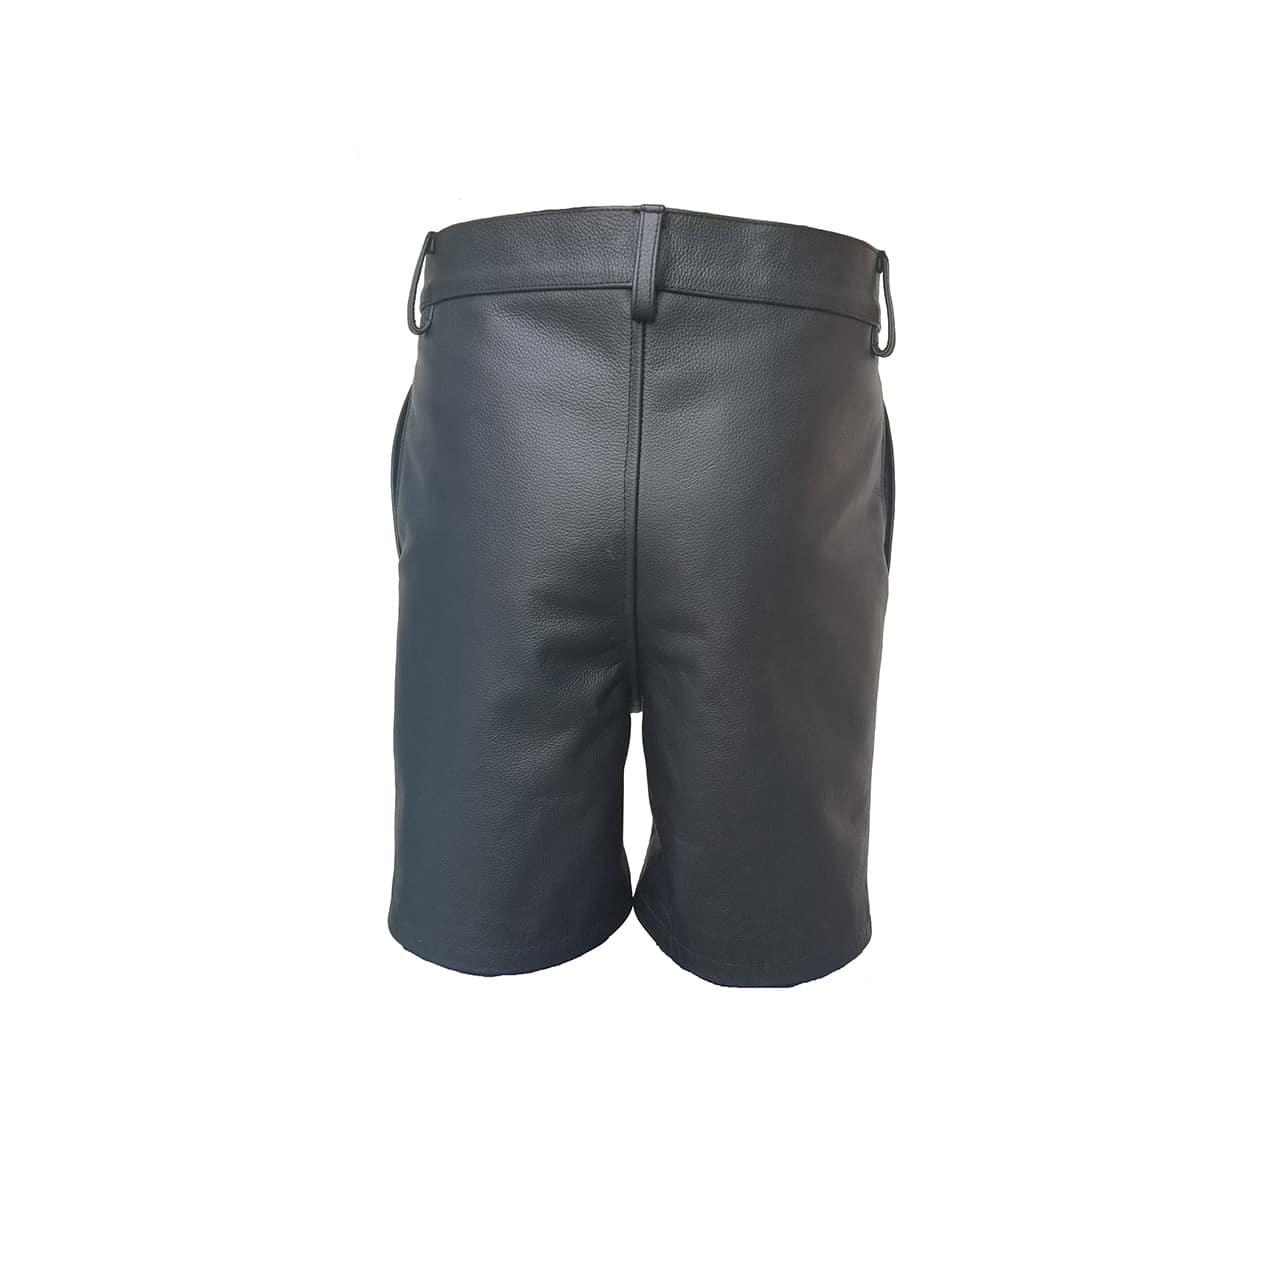 Mens Black Leather Shorts with Lacing Front Closure - (SHORTS2)